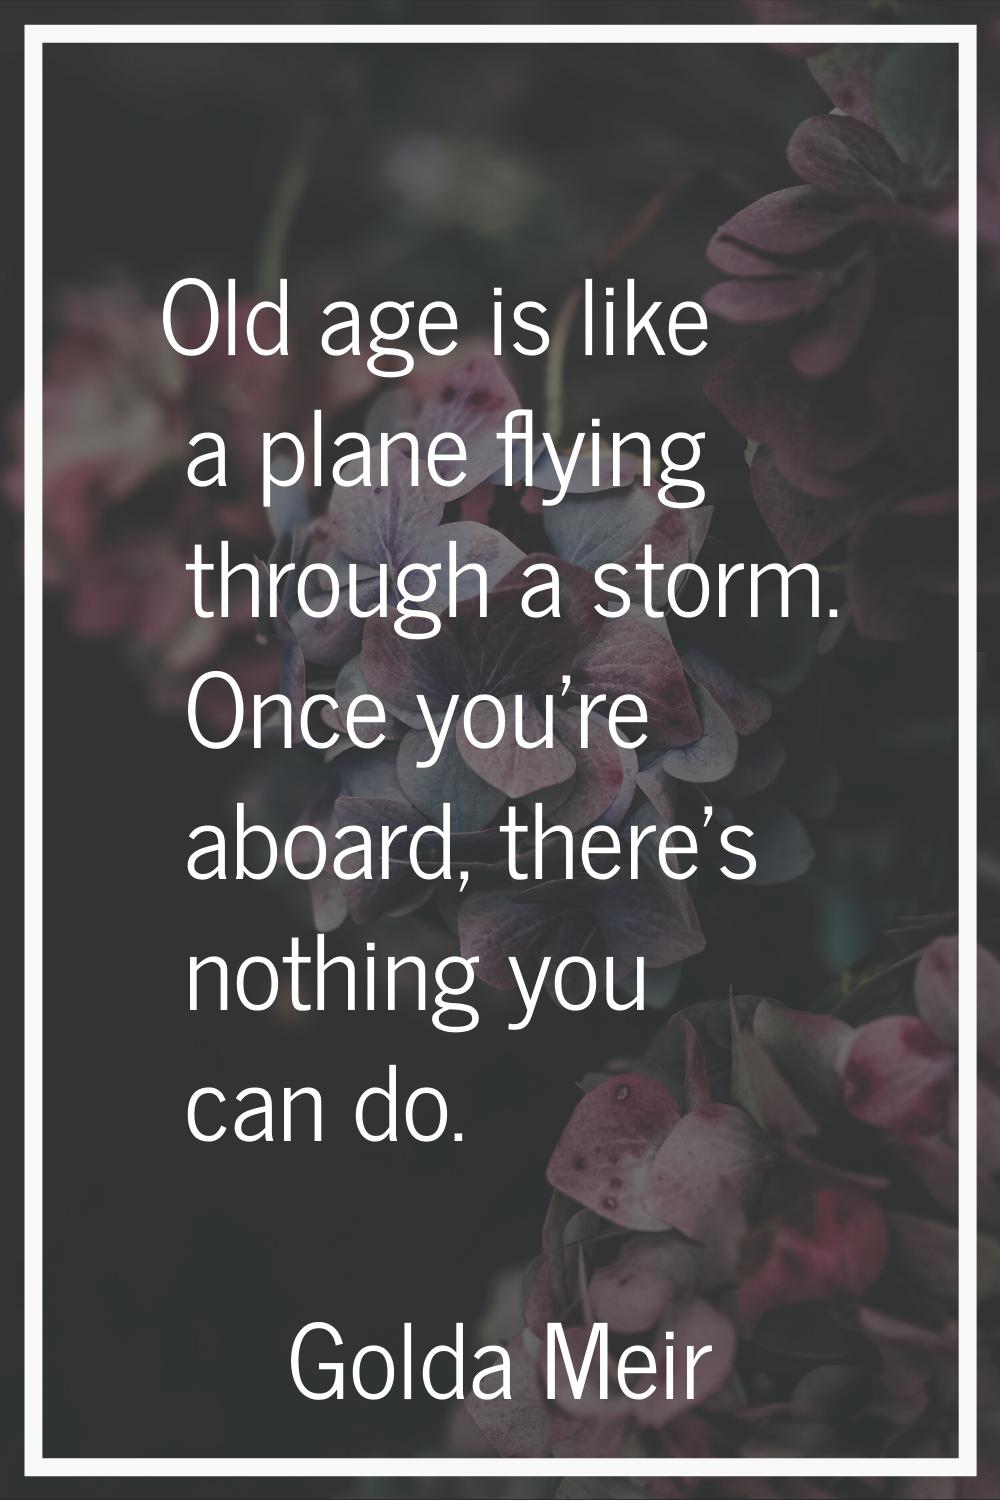 Old age is like a plane flying through a storm. Once you're aboard, there's nothing you can do.